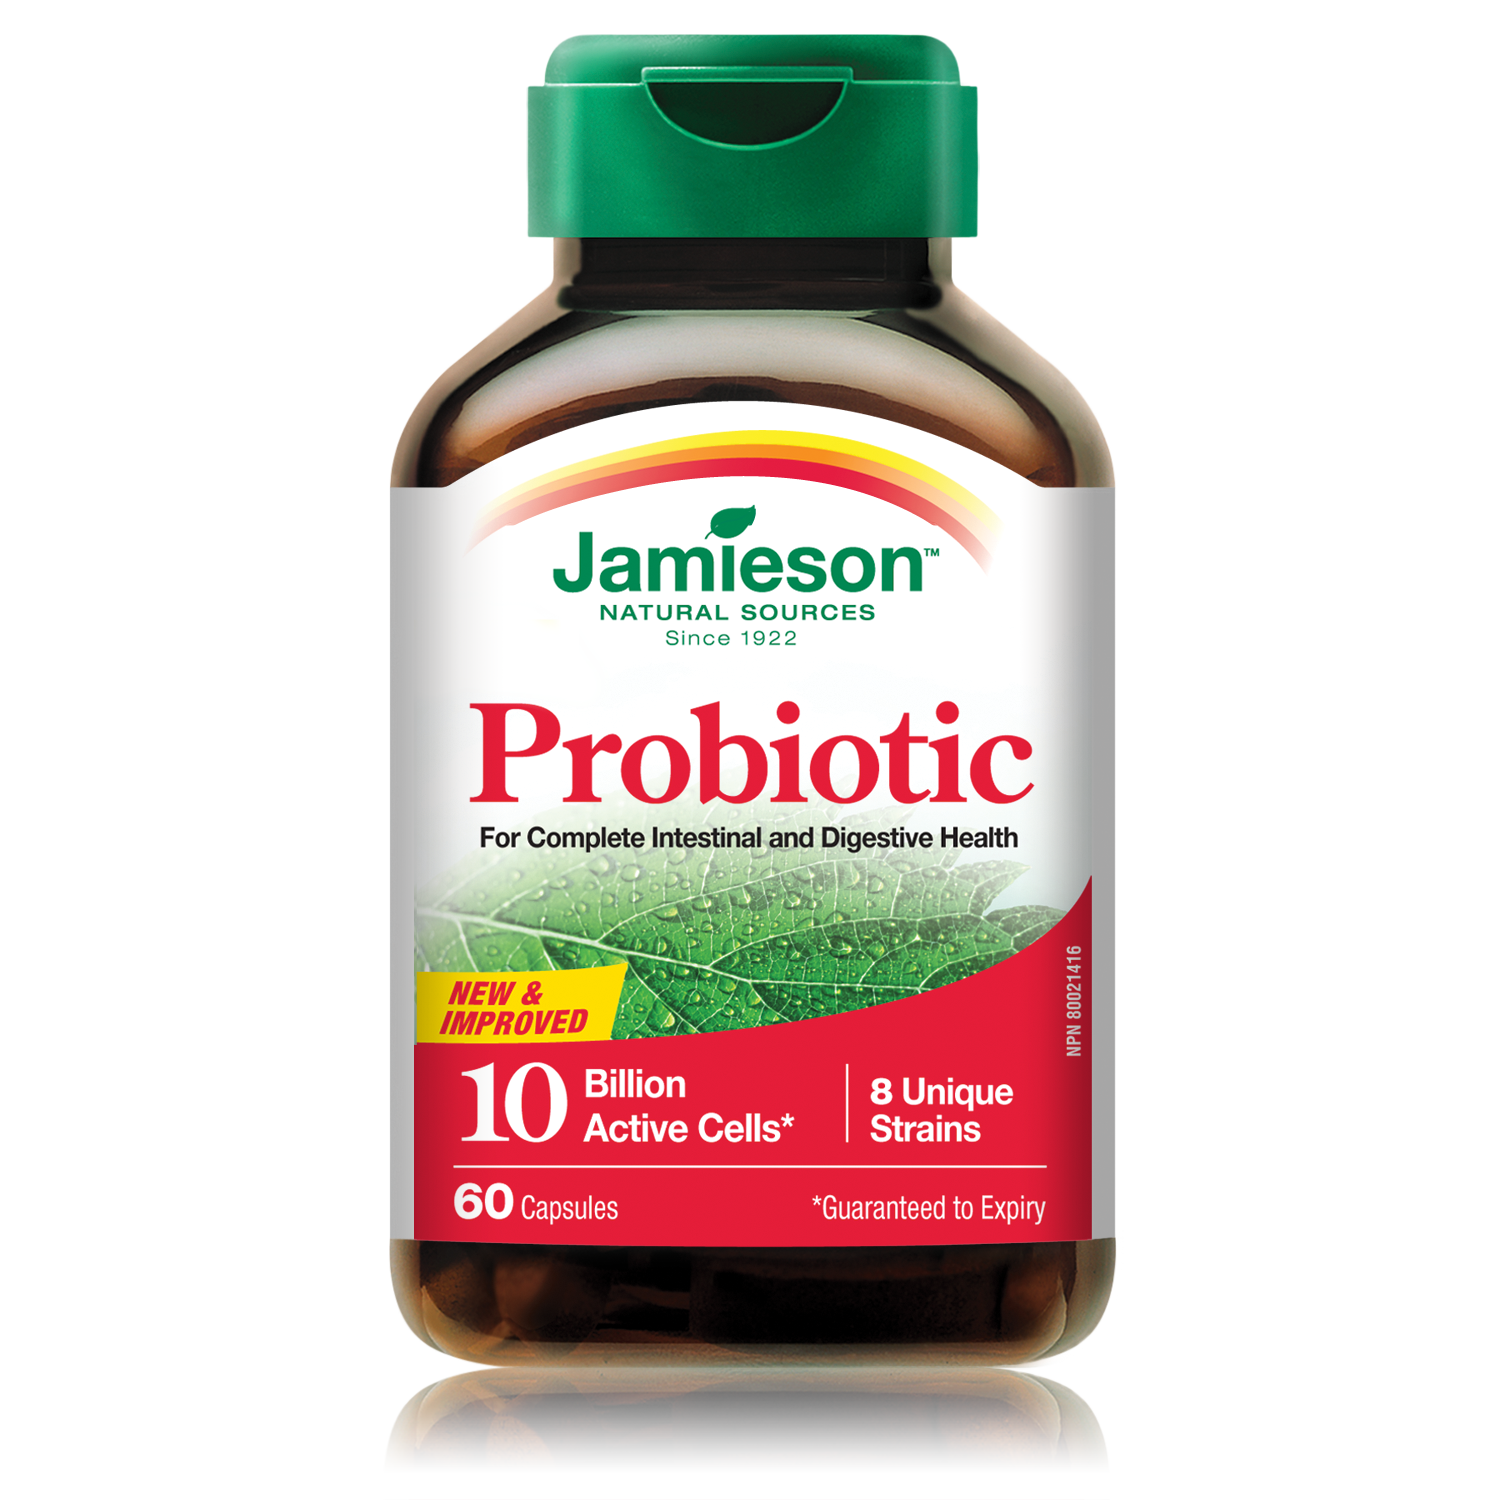 Probiotic Benefits – Probiotic supplements for your immune system